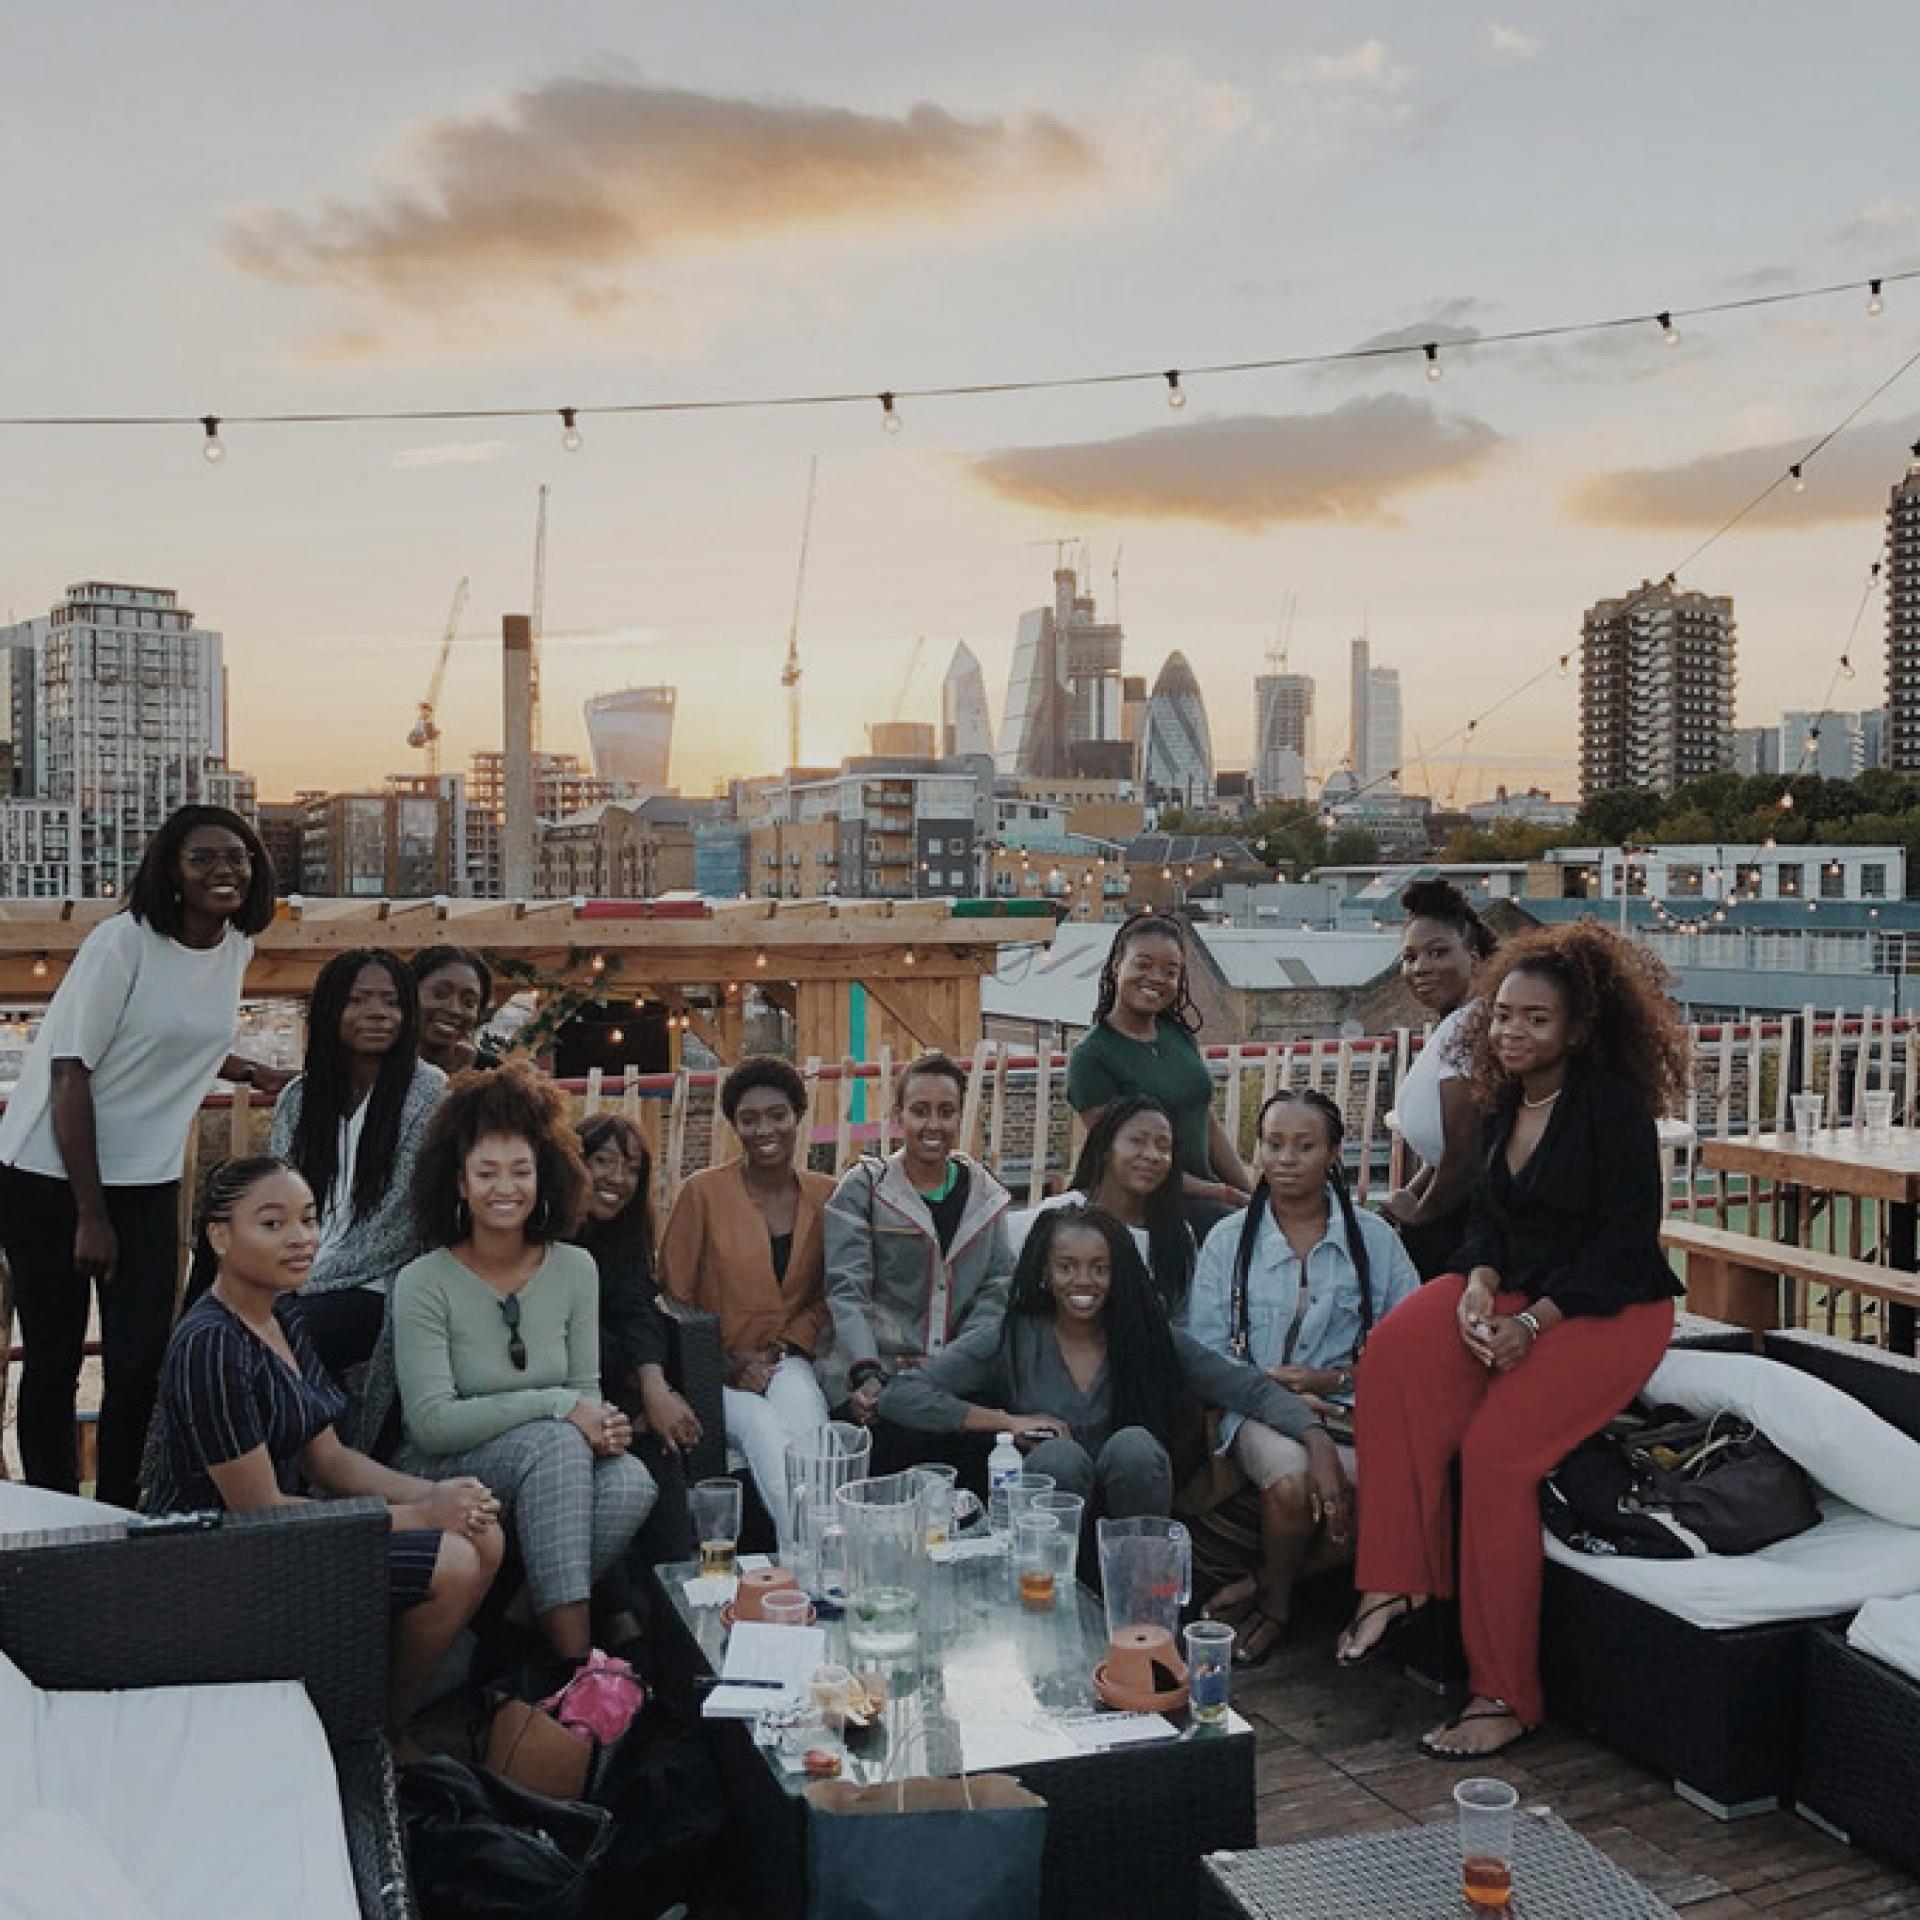 Black Females in Architecture (BFA) encourages diversity in architecture via organized workshops and sharing advice on WhatsApp. | Photo via Dezeen